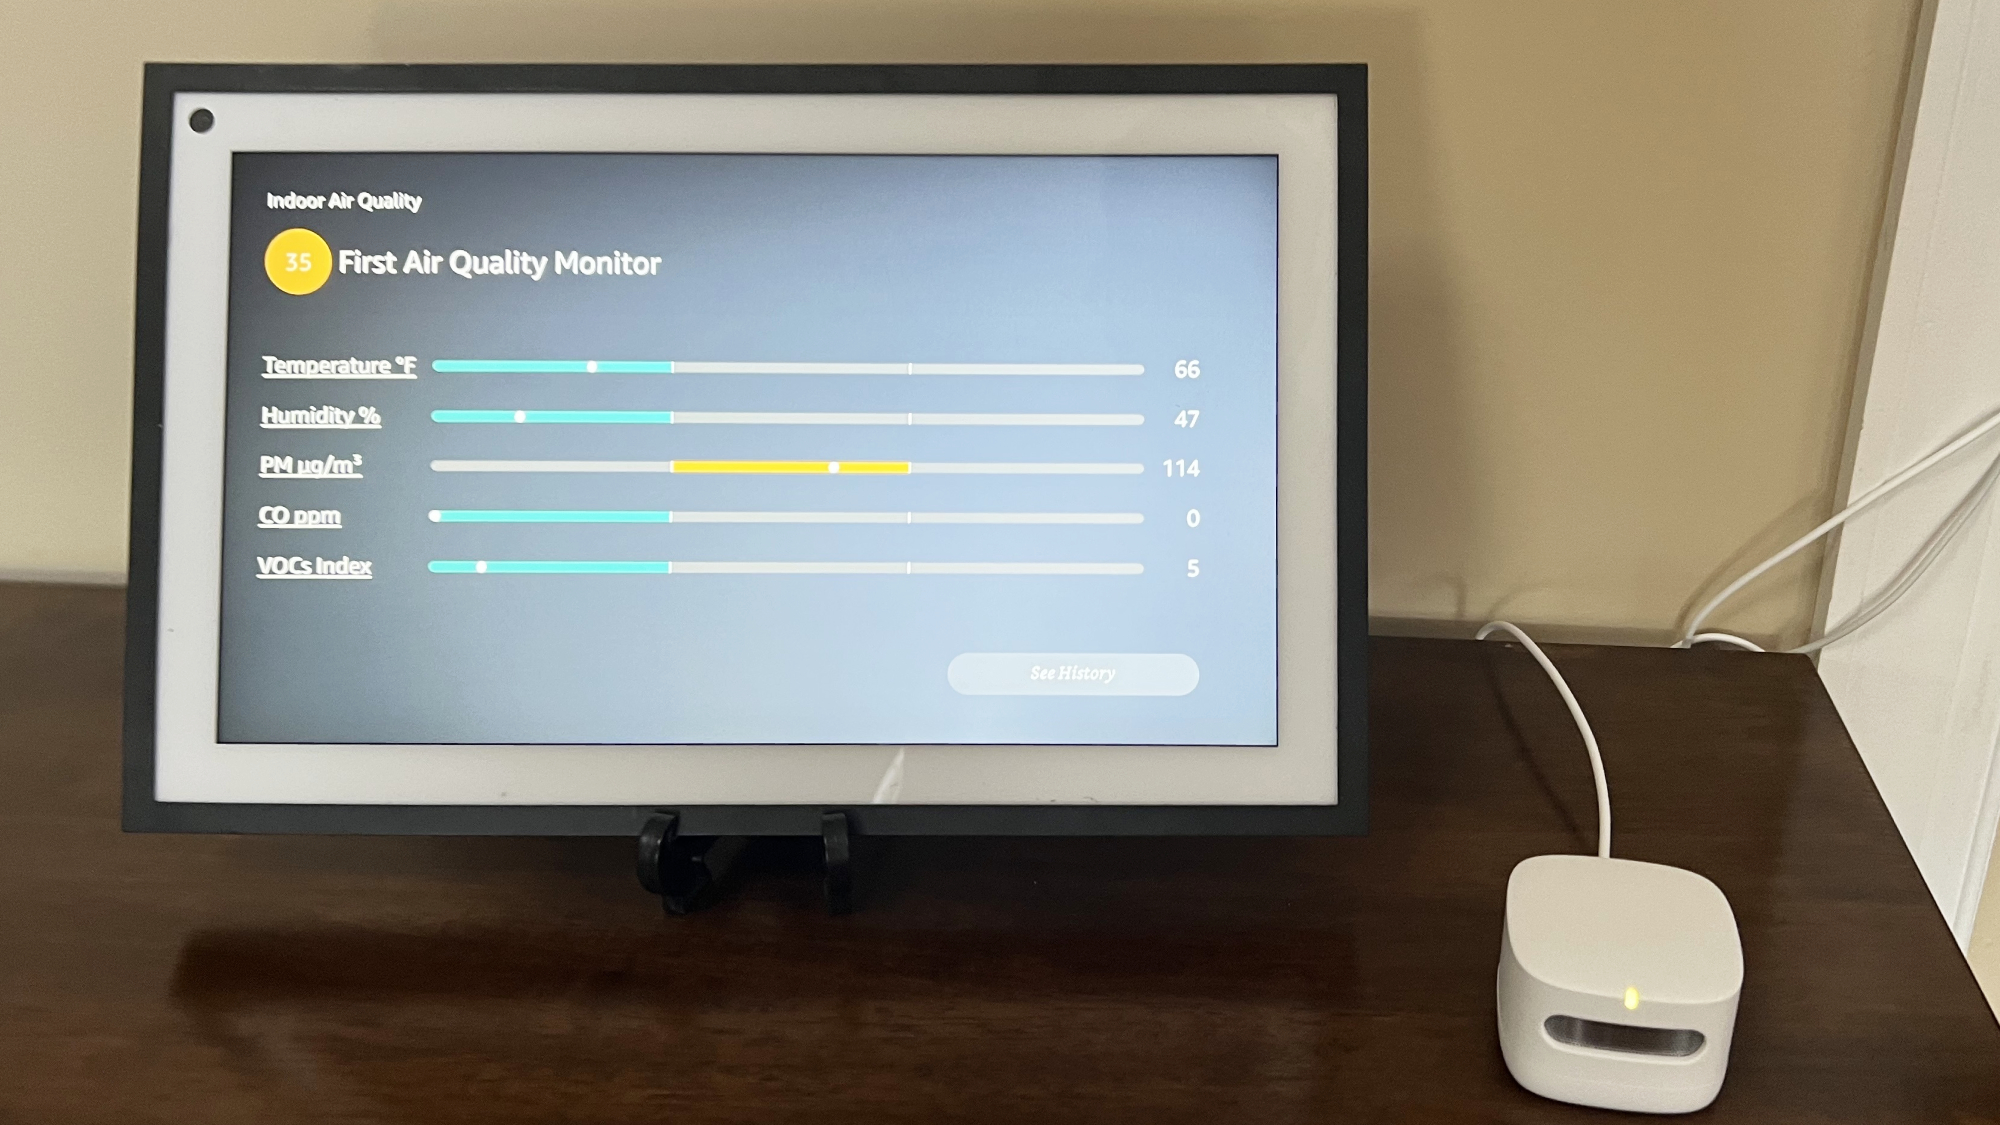 Echo Show 15 Shows Amazon Air Quality Monitor results